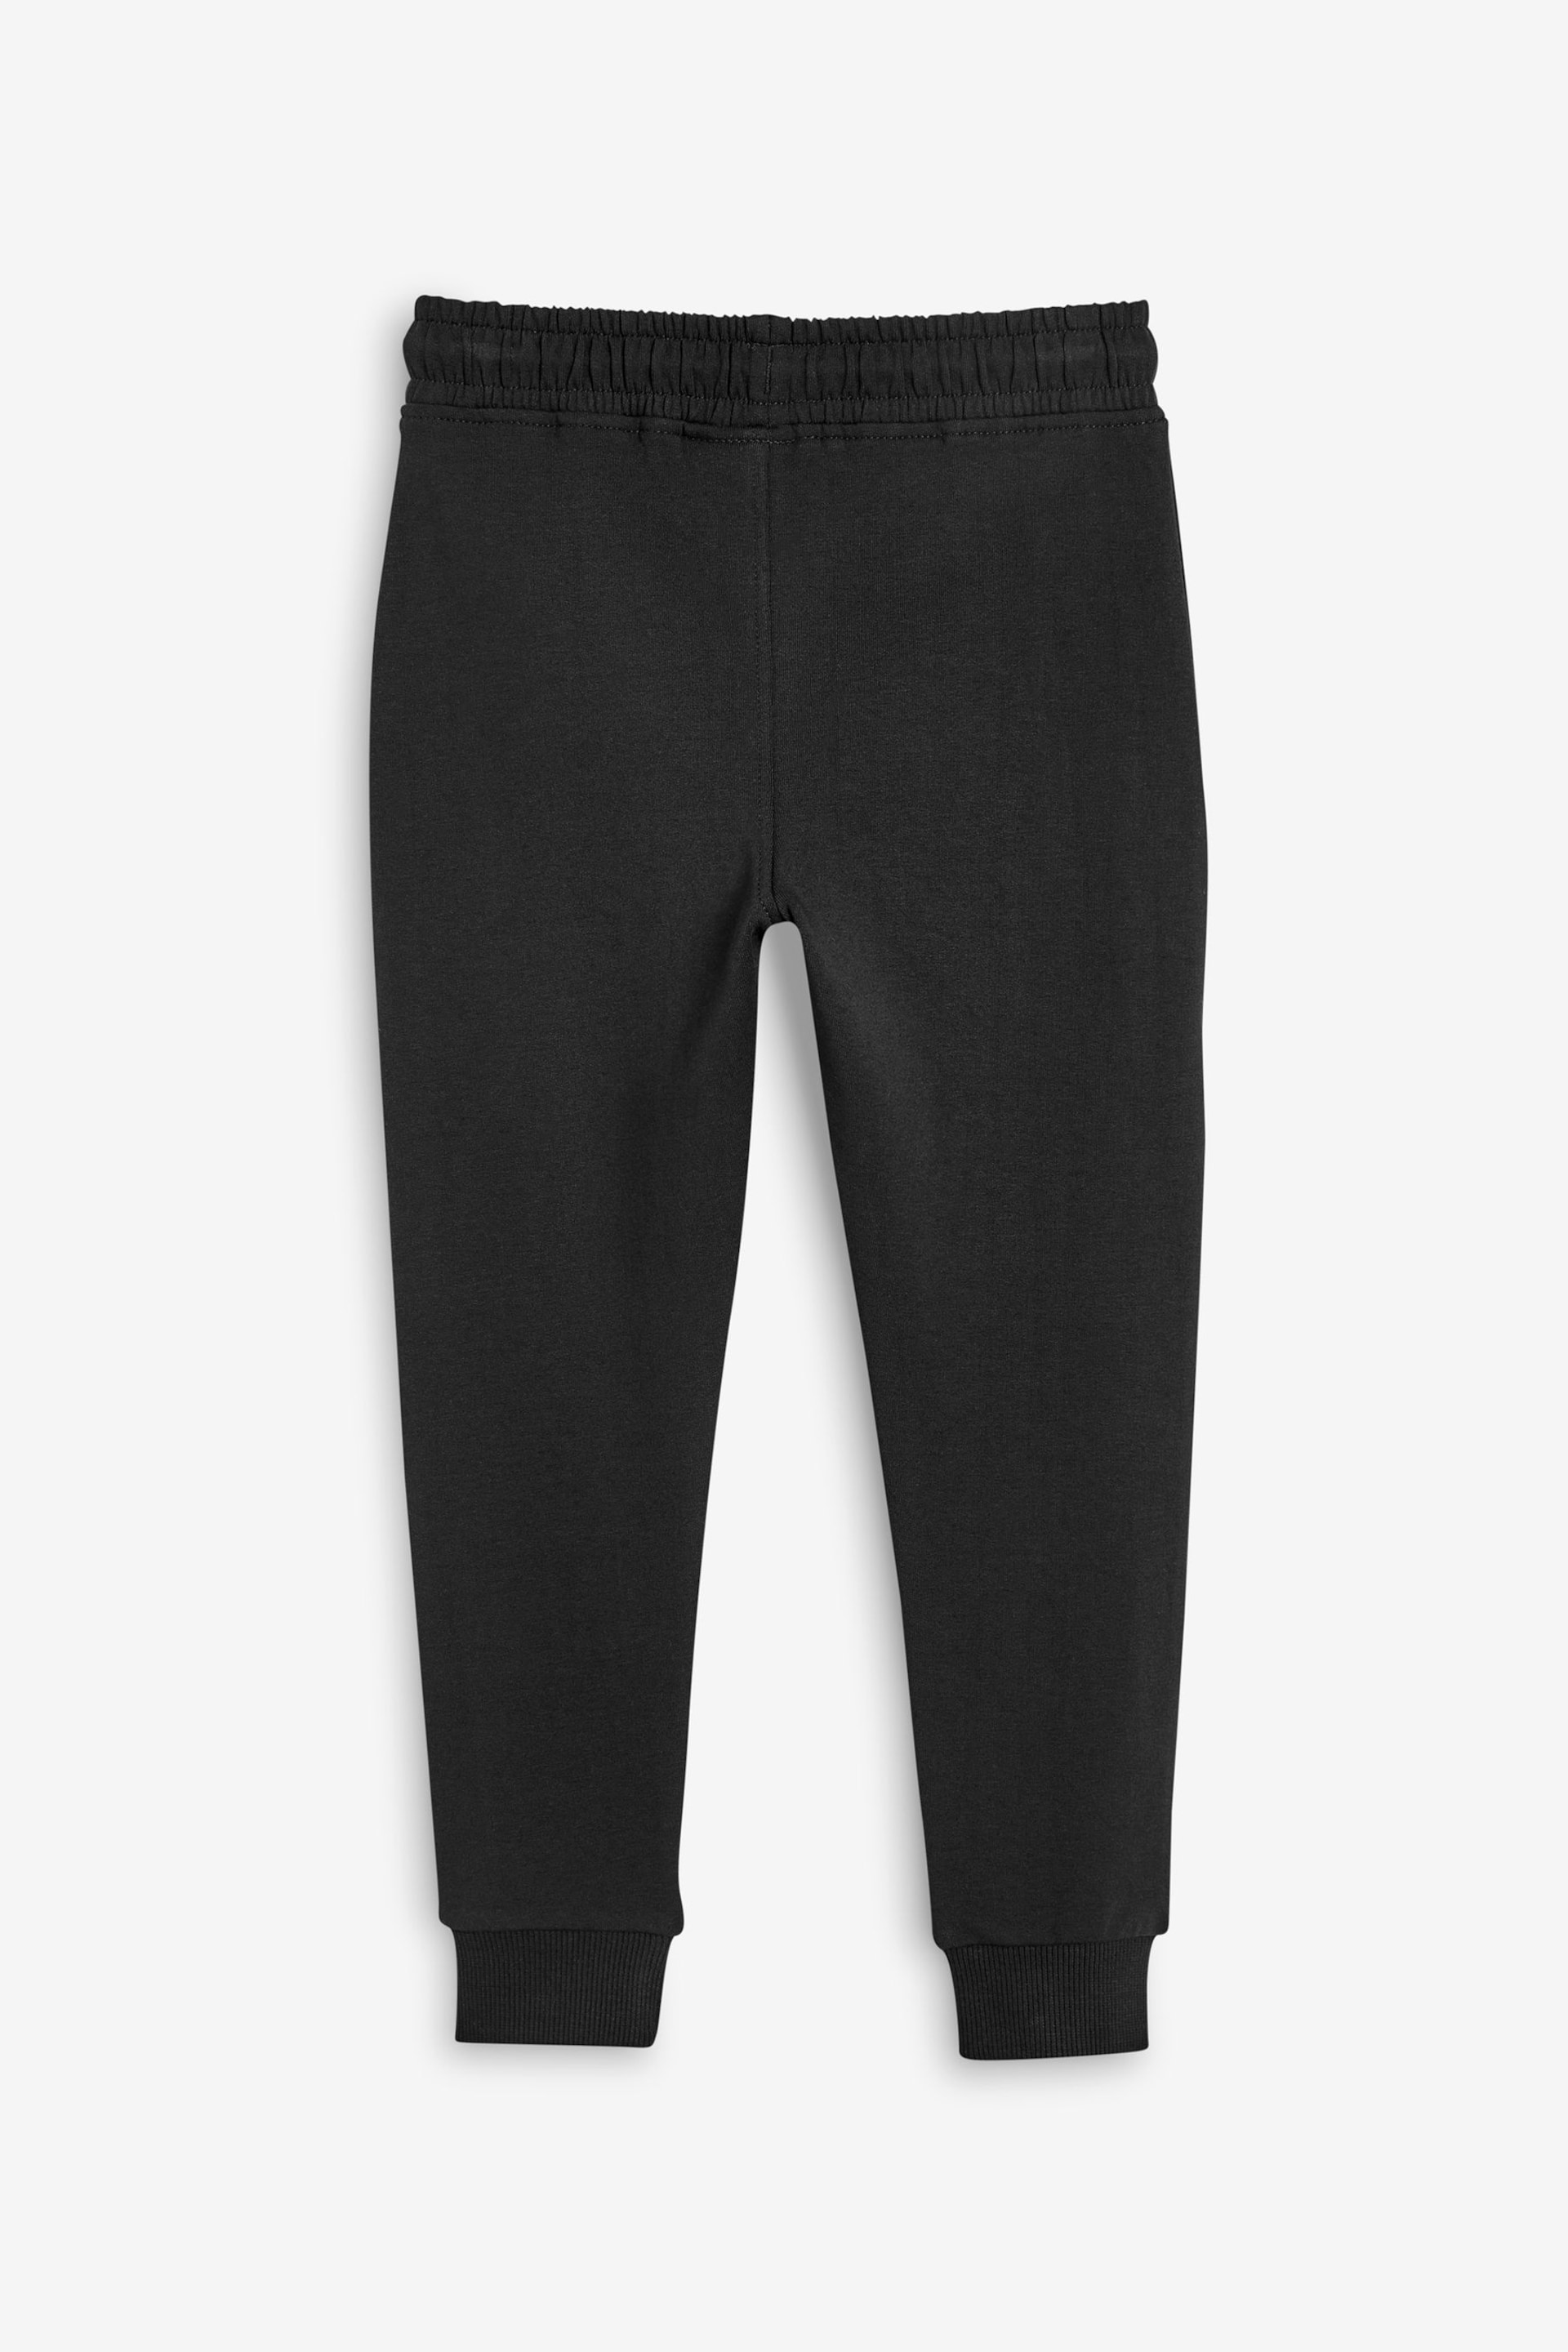 Black Skinny Fit Joggers (3-16yrs) - Image 6 of 7